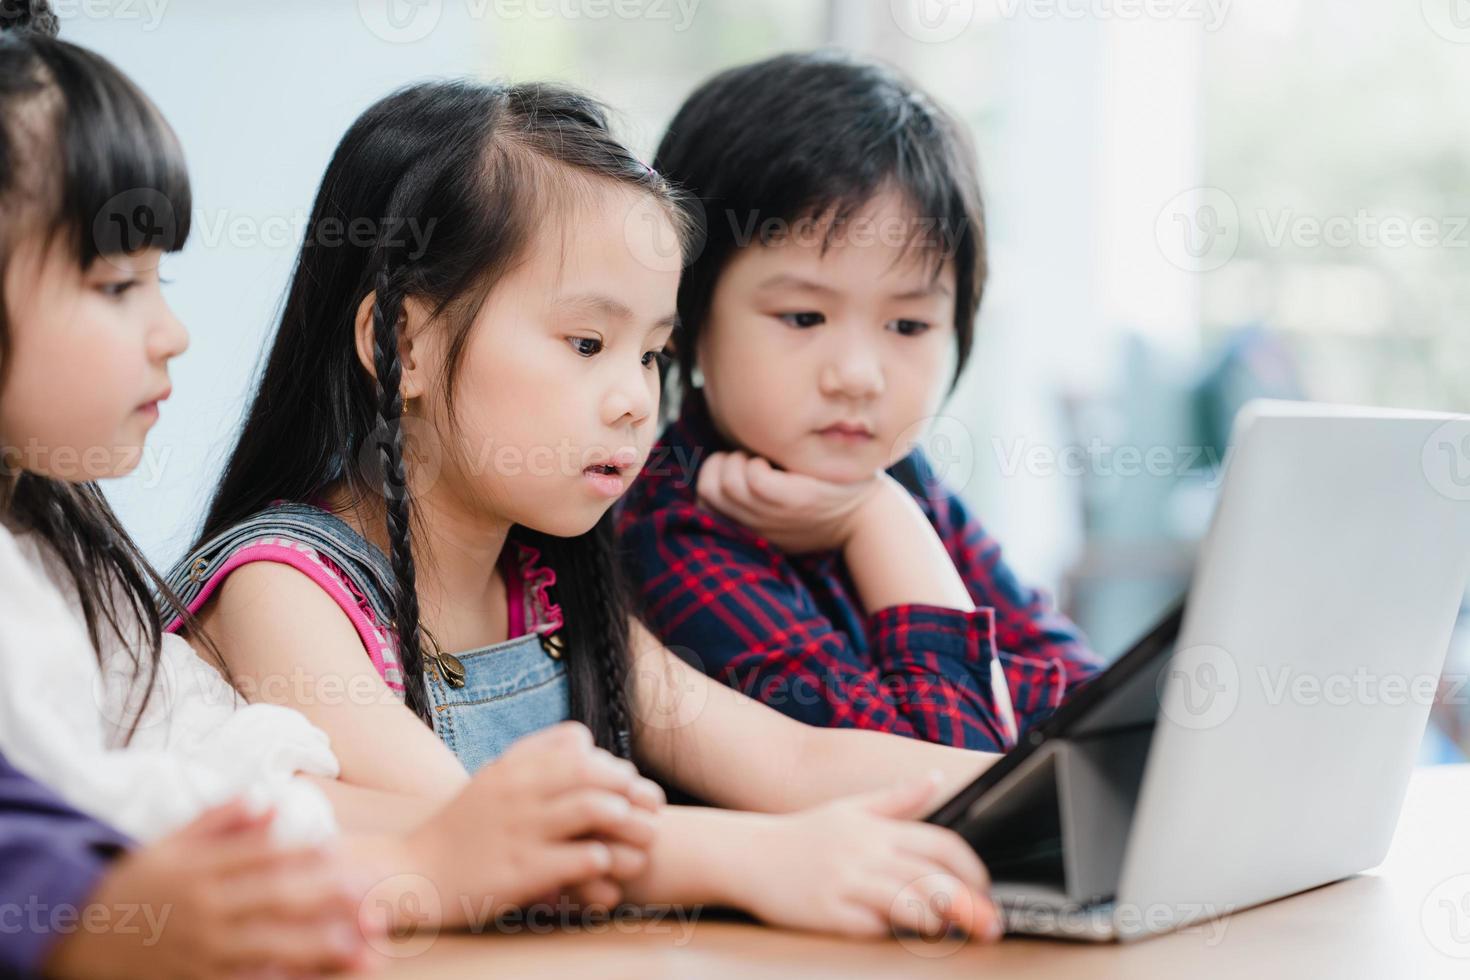 Group of children using laptop in classroom, Multi-ethnic young boys and girls happy using technology for study at elementary school. Kids use technology for education concept. photo